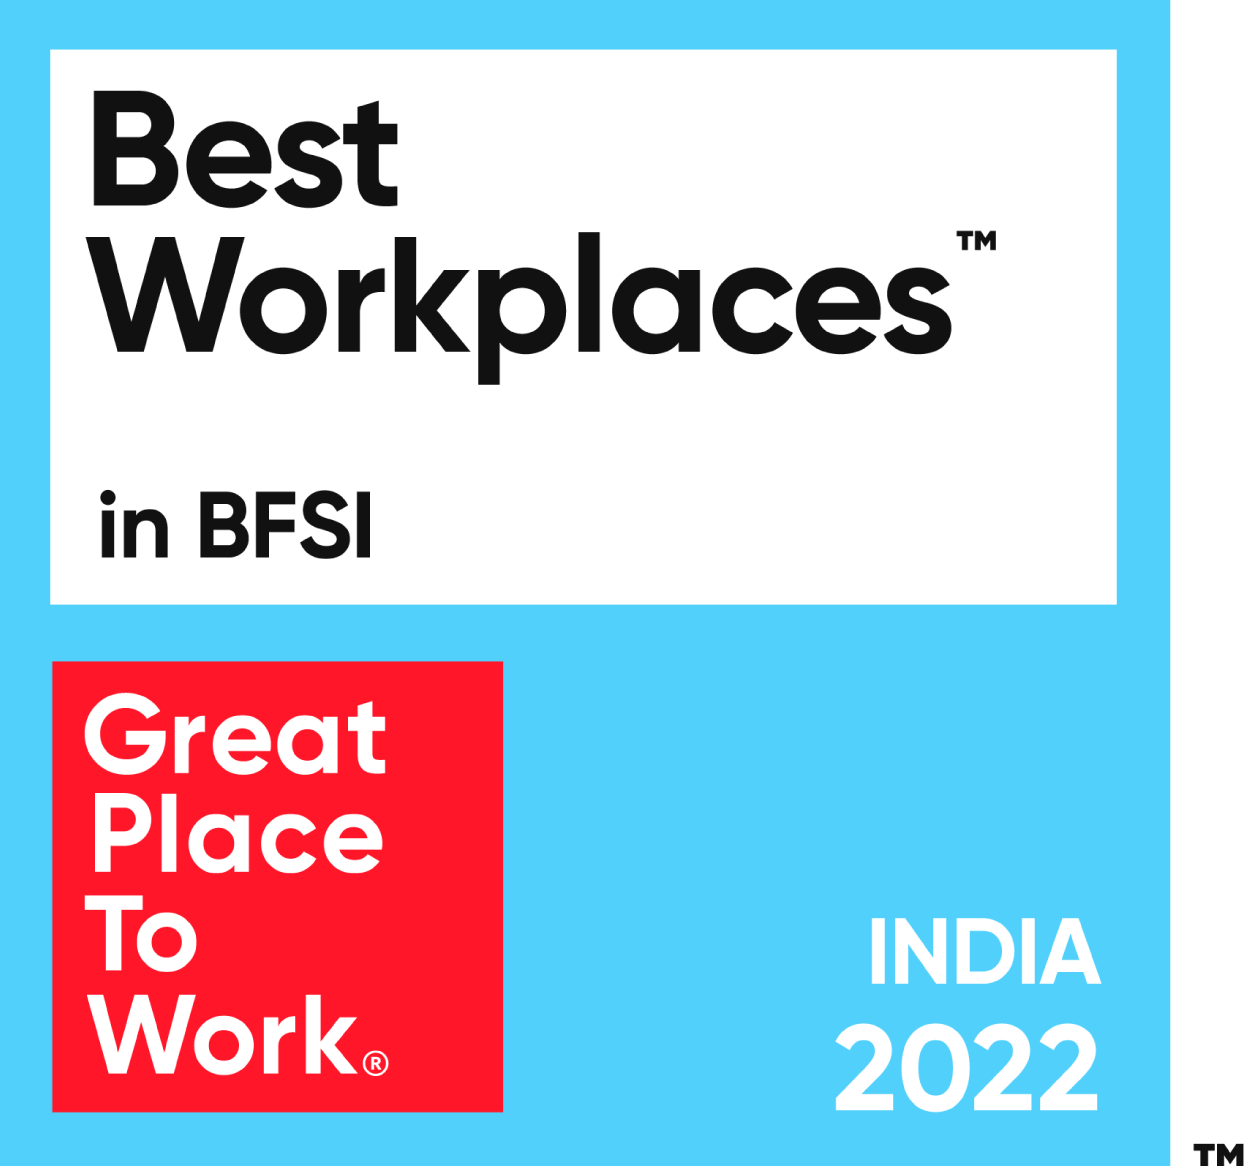 LOGO_INDIA'S-BEST-WORKPLACES-IN-BFSI-2022